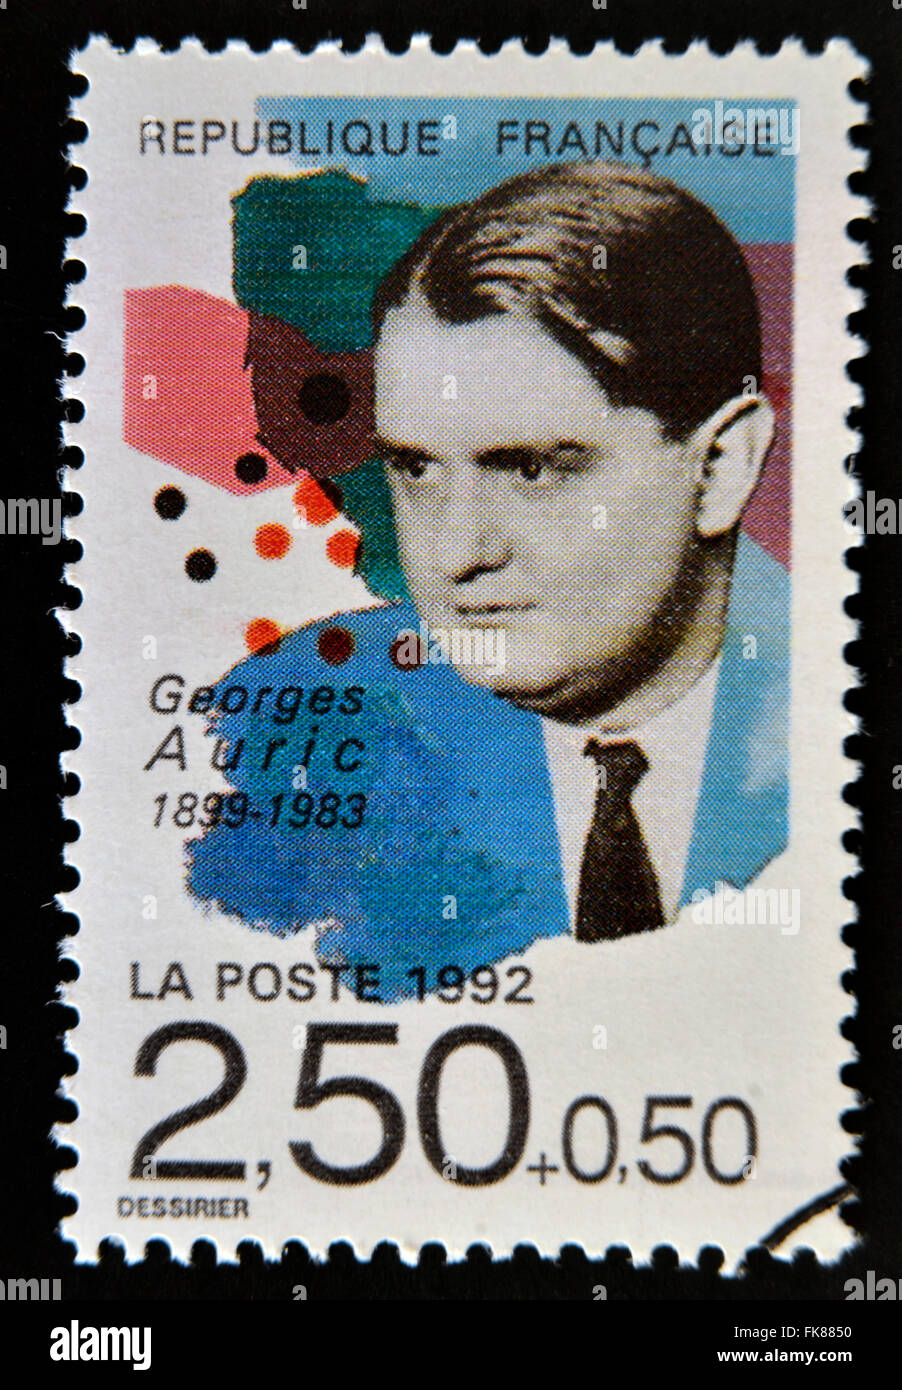 FRANCE - CIRCA 1992: A stamp printed in France shows Georges Auric, circa 1992 Stock Photo